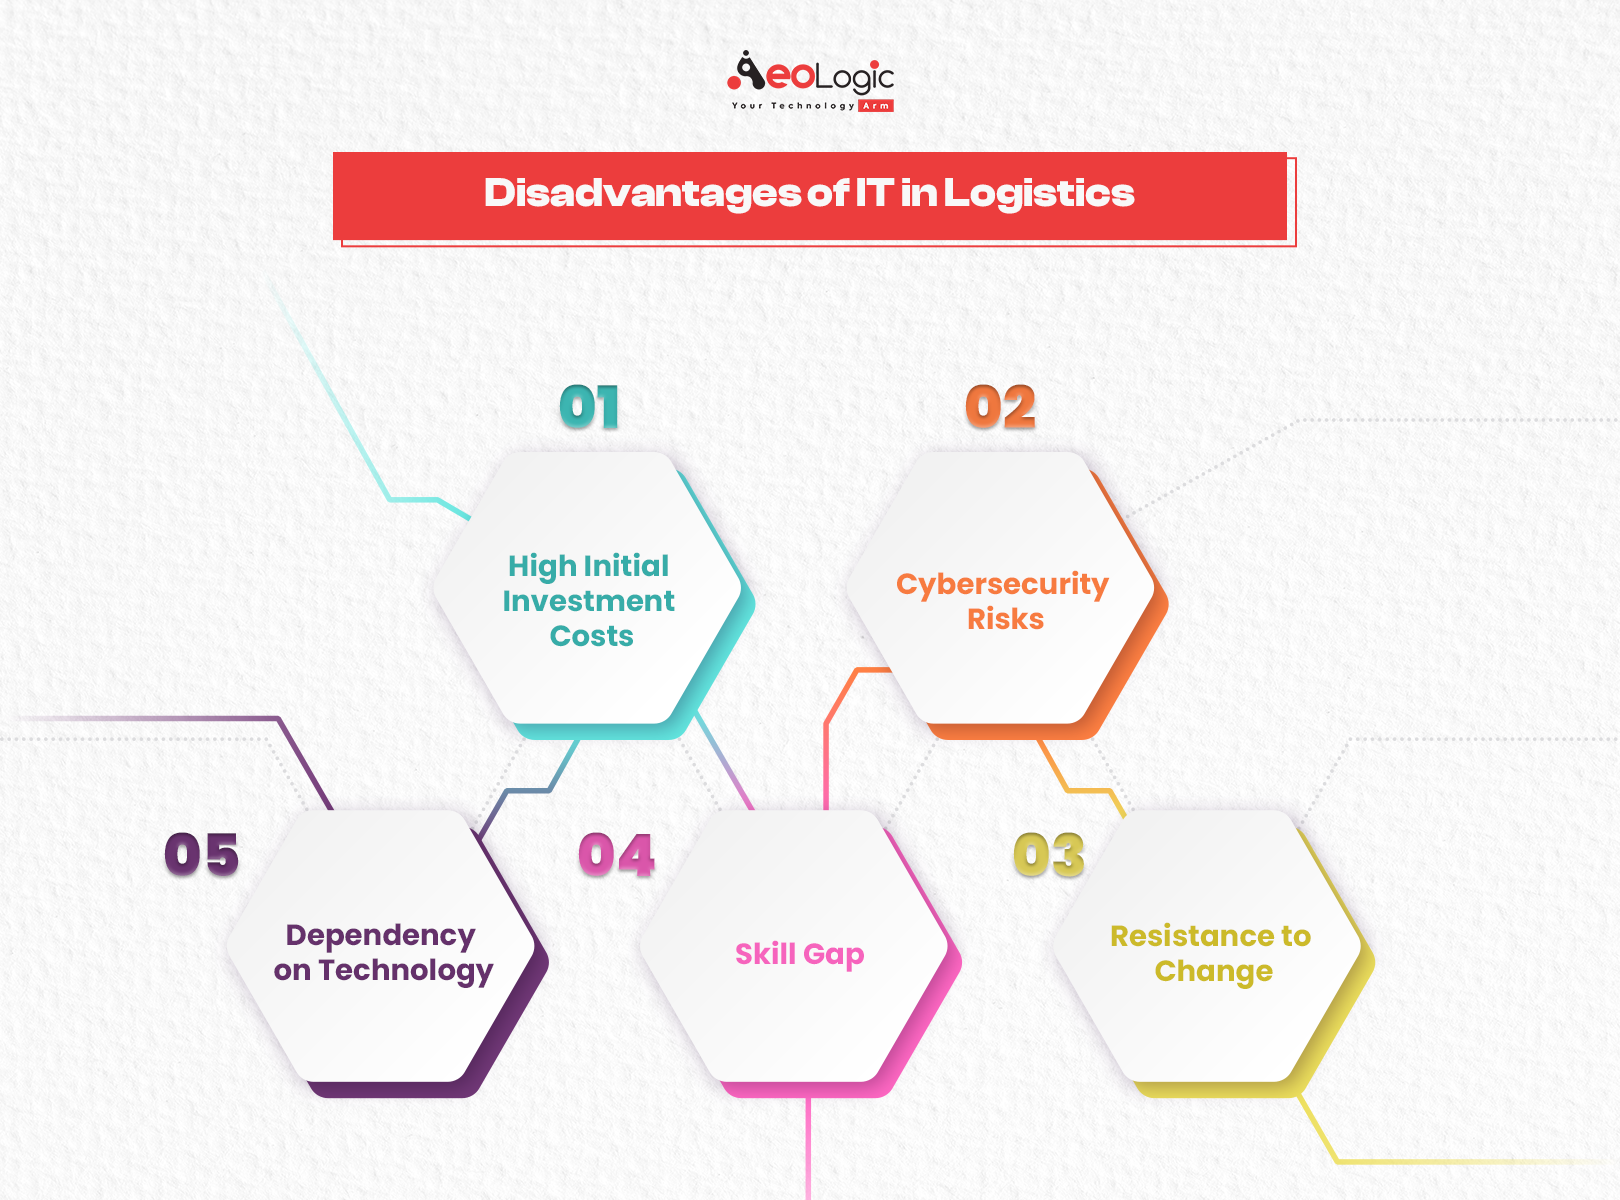 Disadvantages of IT in Logistics